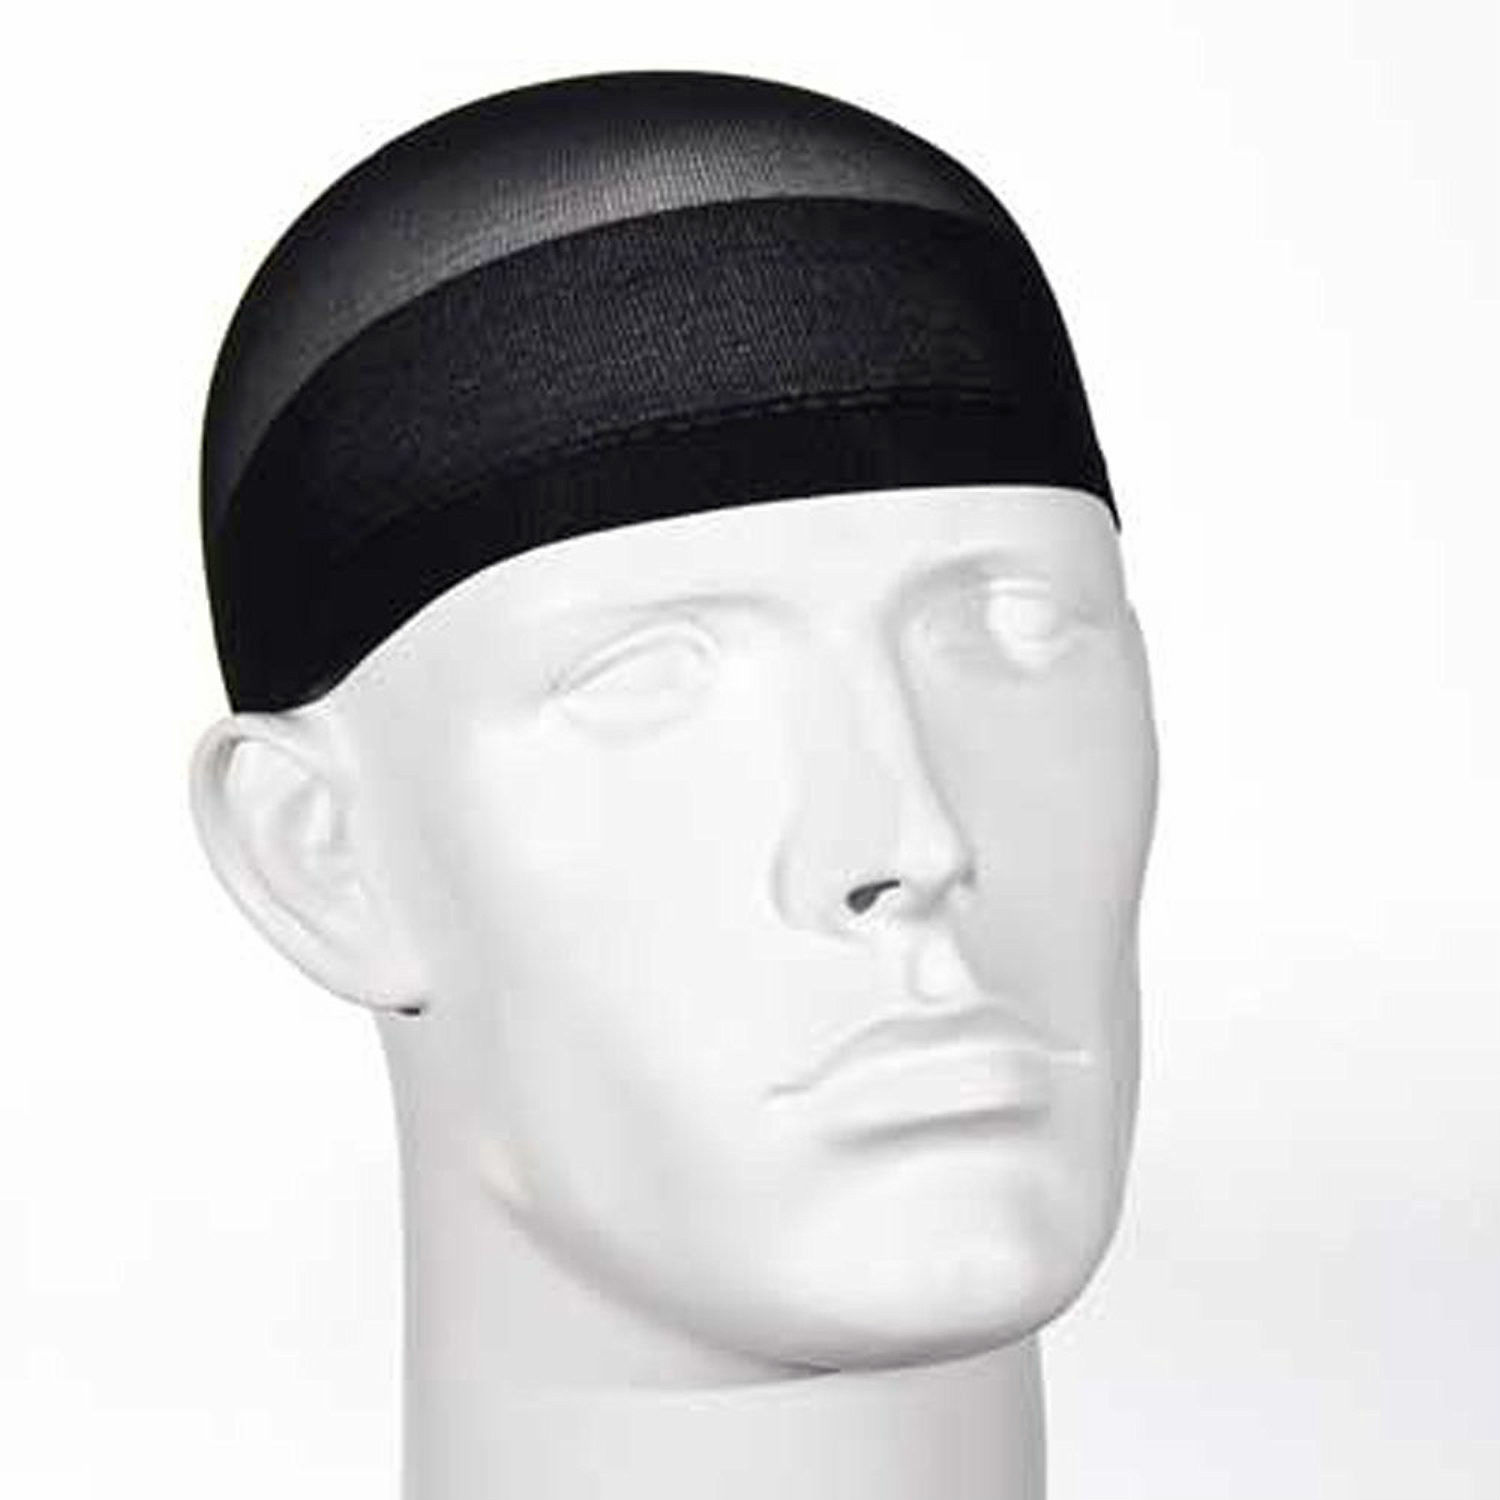 Buy Breathable Stocking Caps for Men Online @ ₹160 from ShopClues